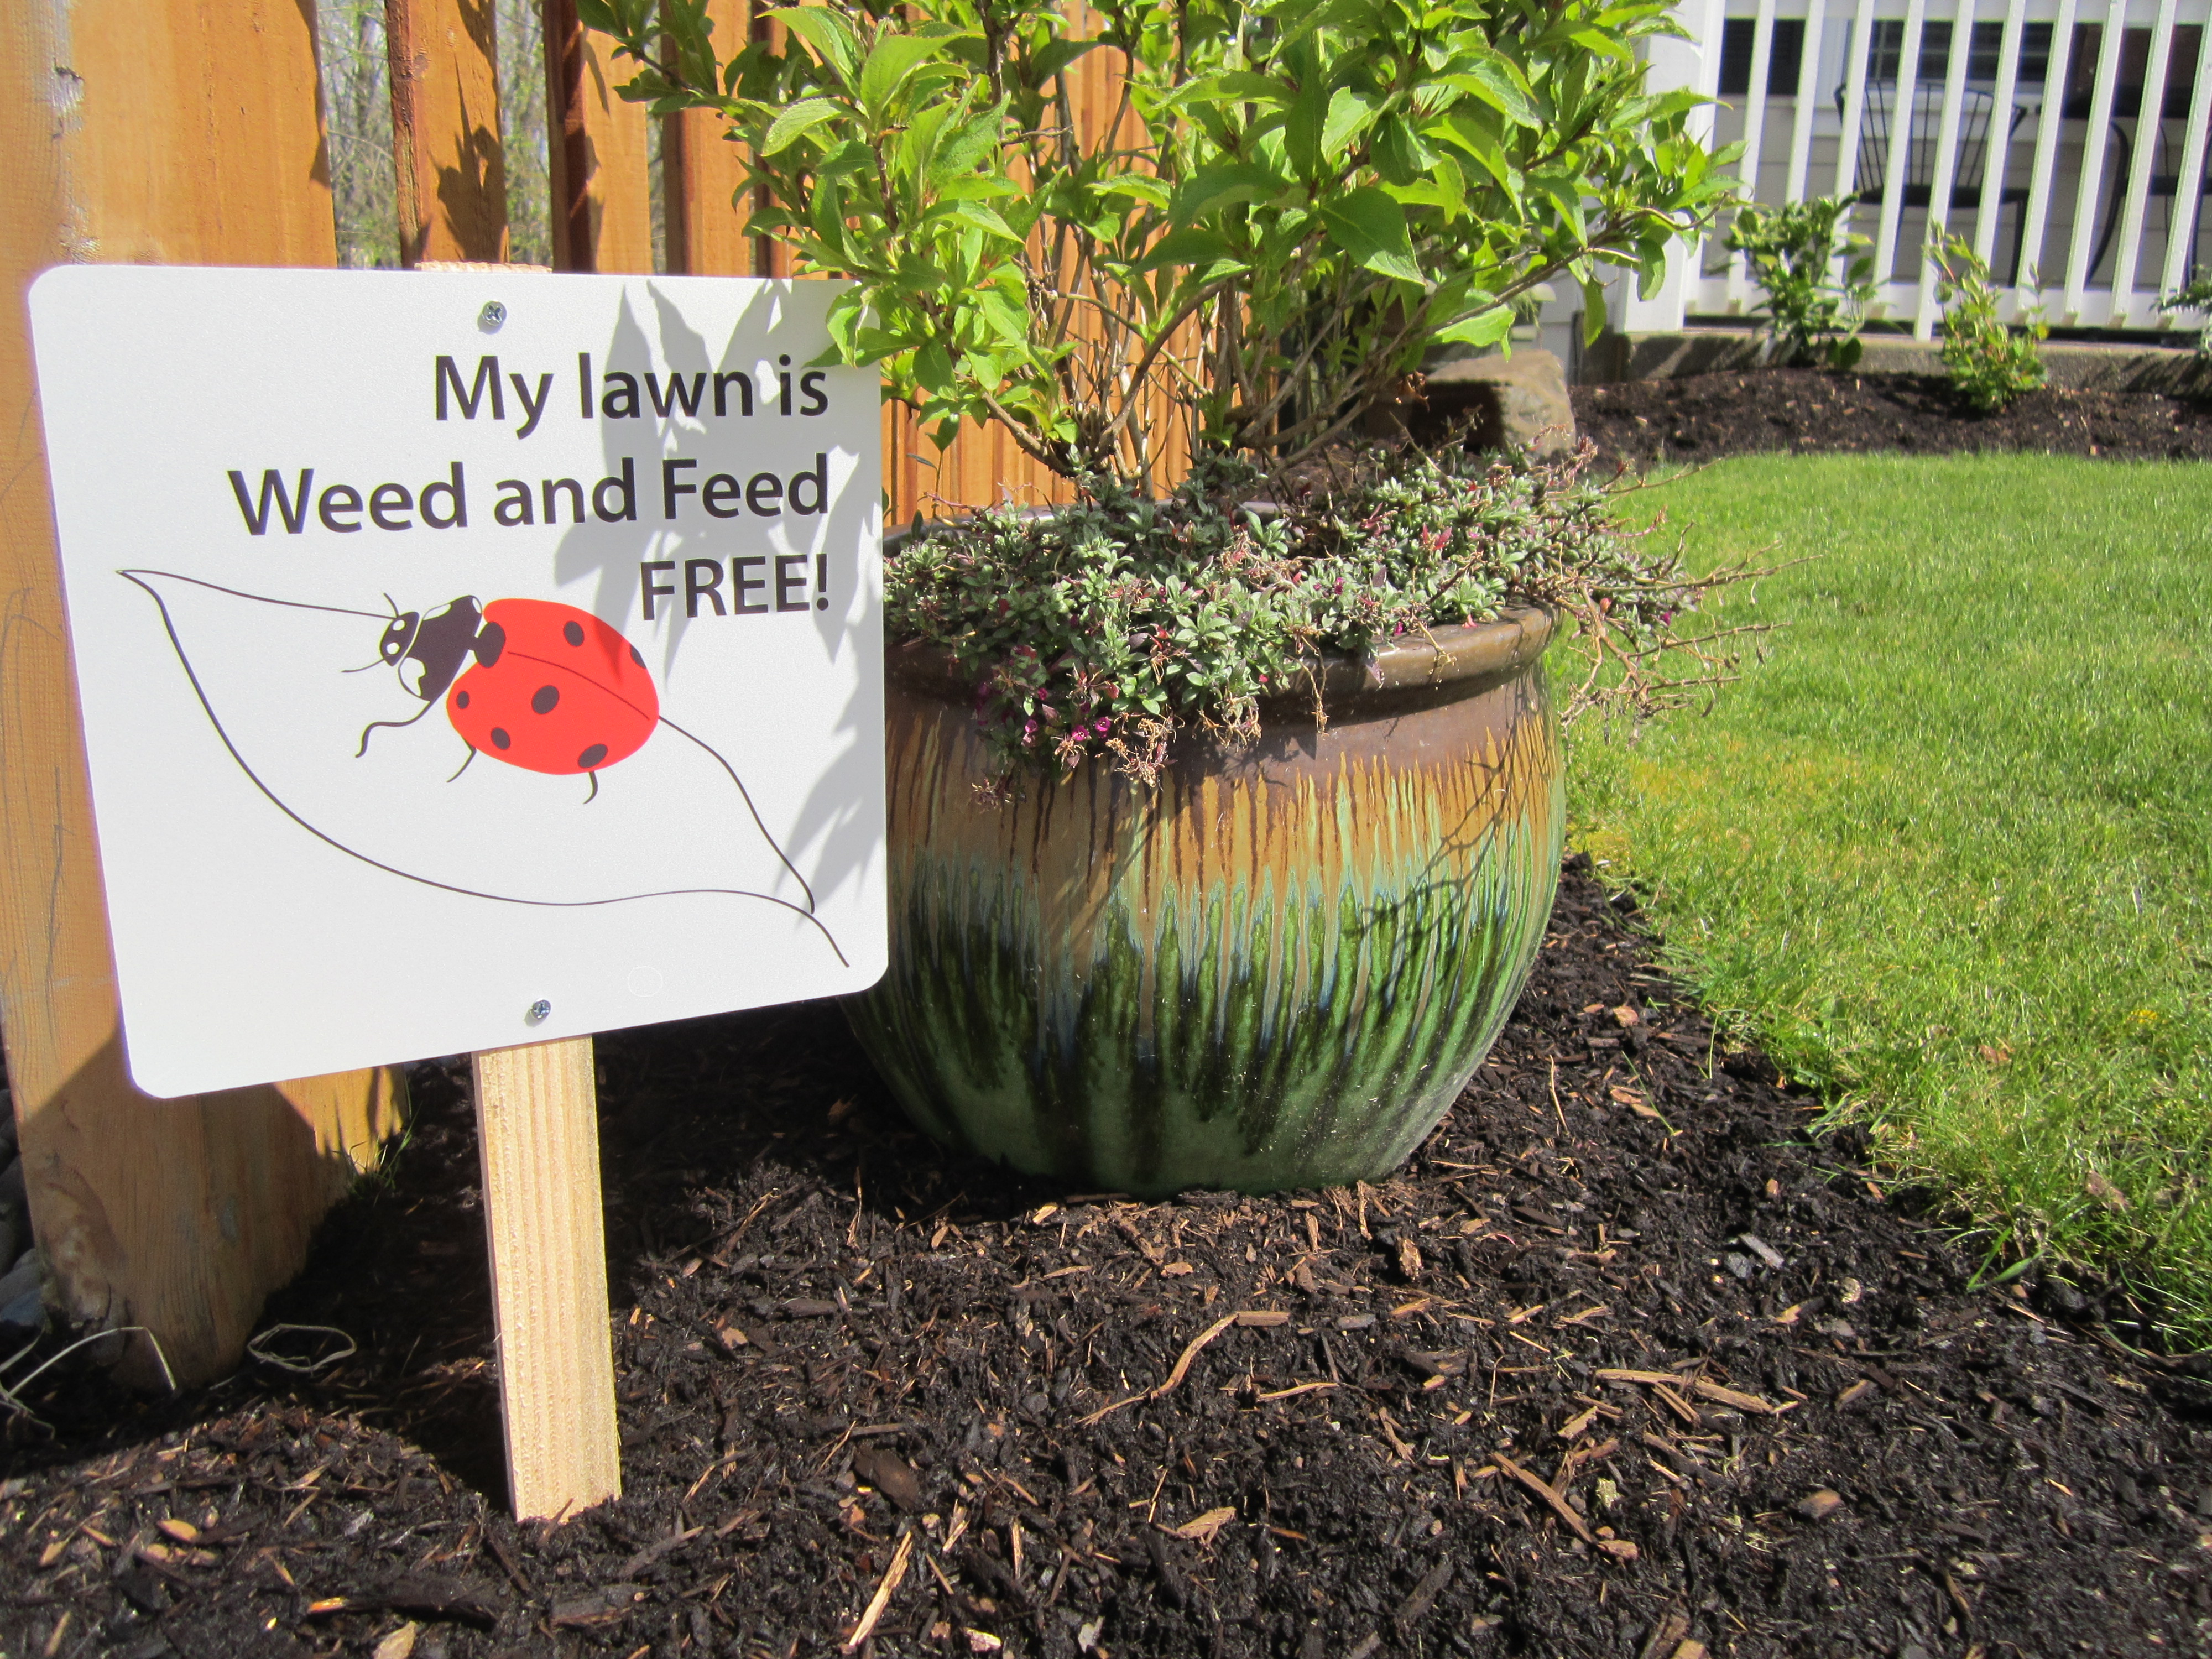 Weed and feed free lawn sign